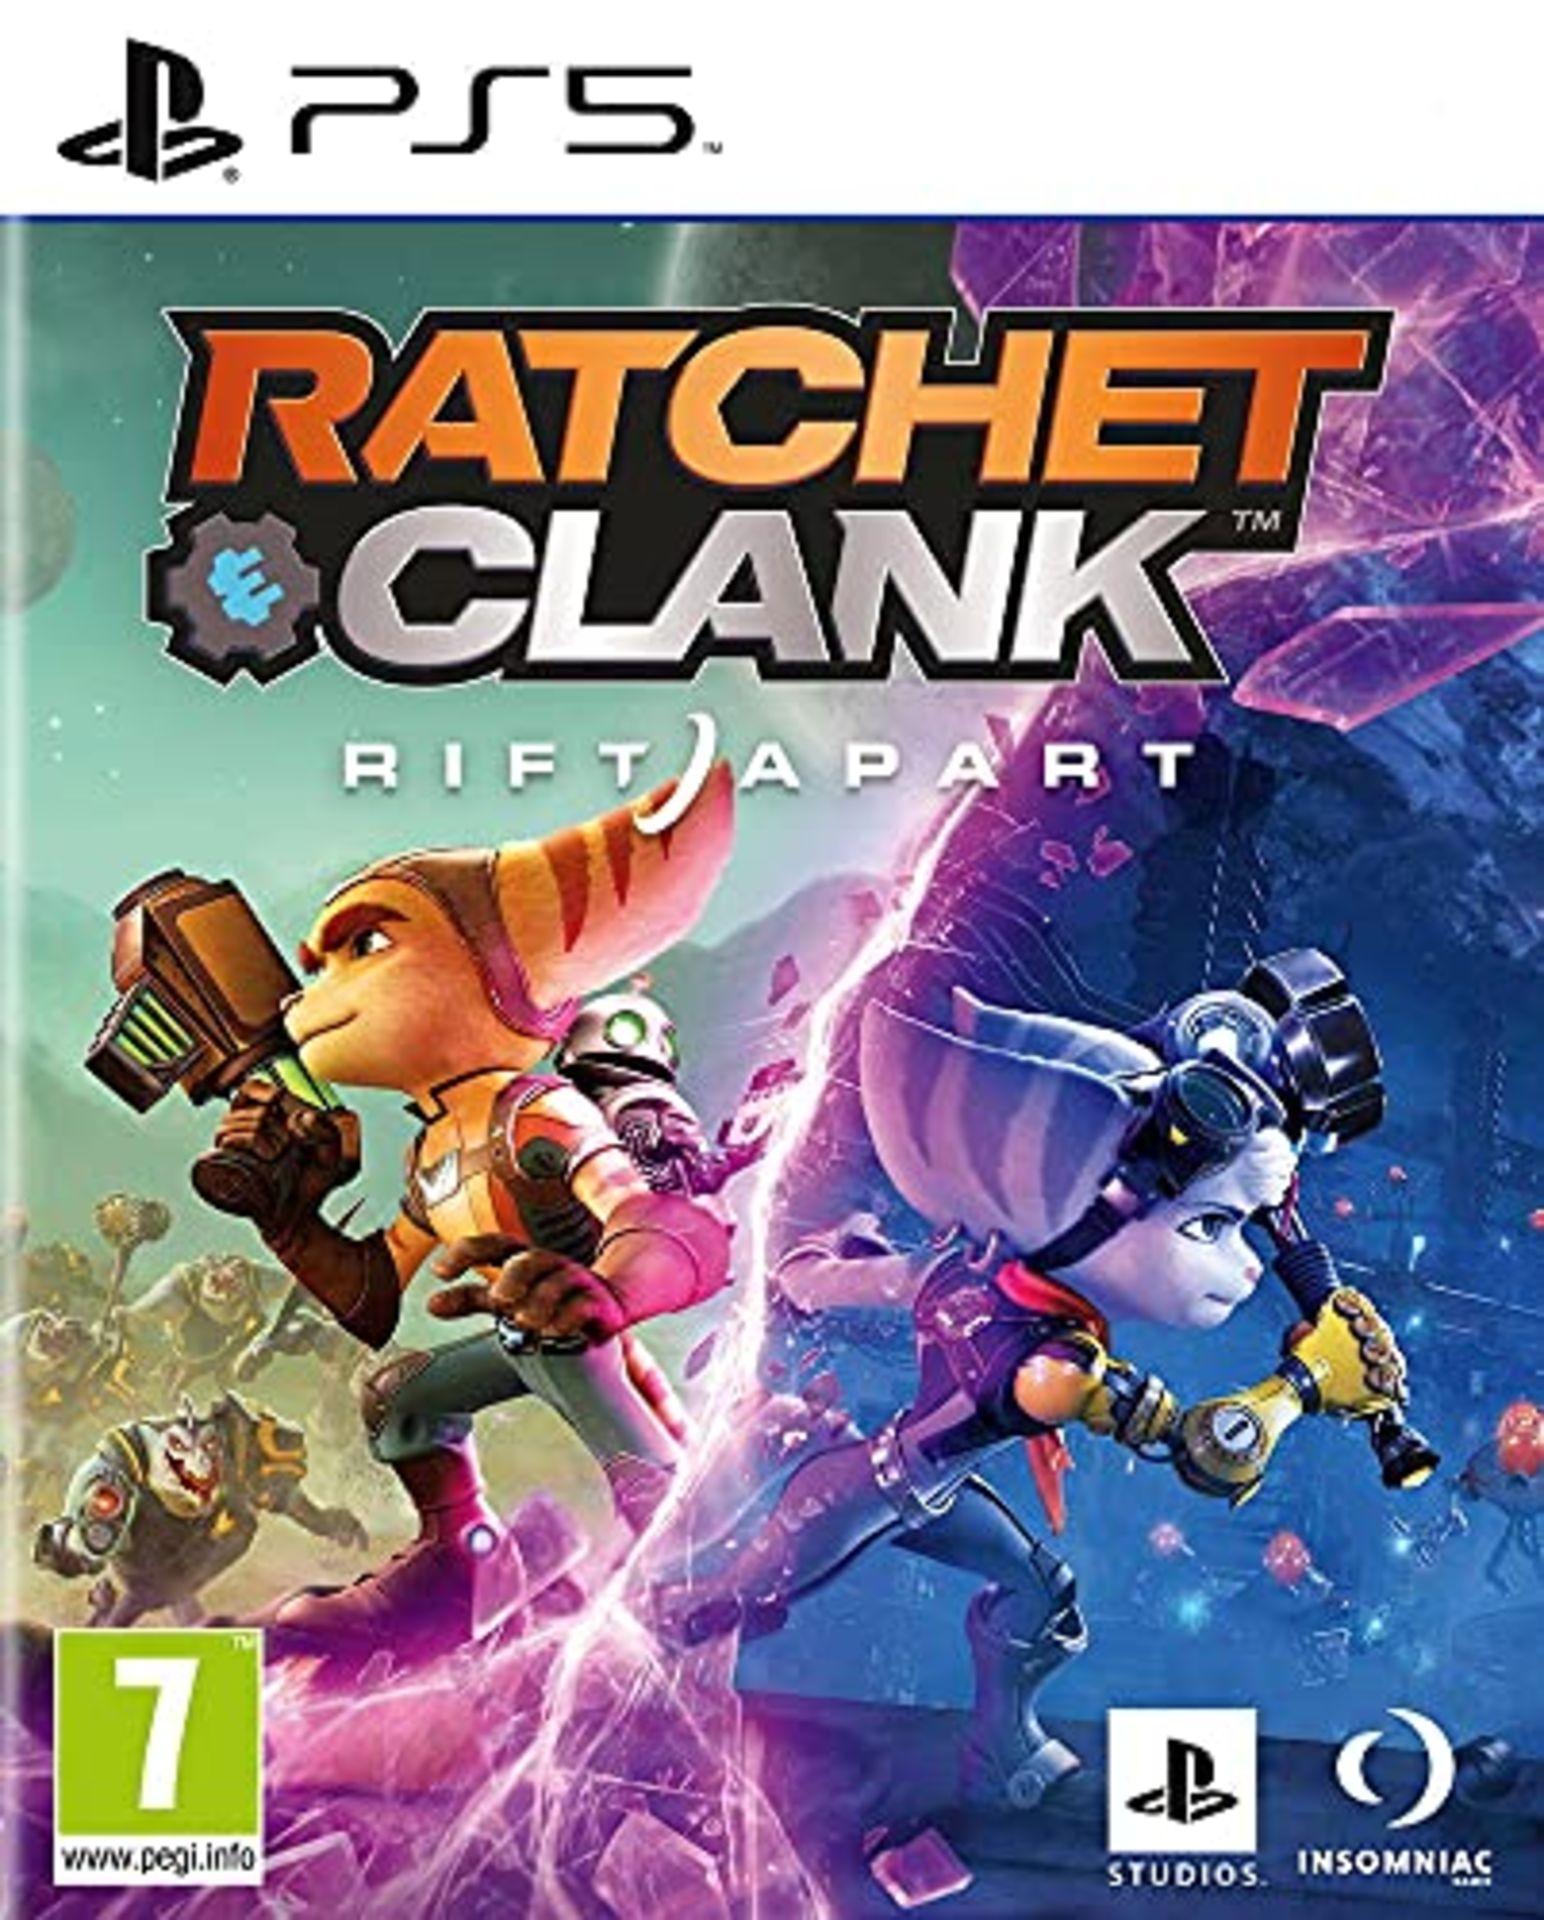 RRP £54.00 Sony, Ratchet & Clank: Rift Apart for PS5, Platform and Adventure game, Standard Editi - Image 4 of 6